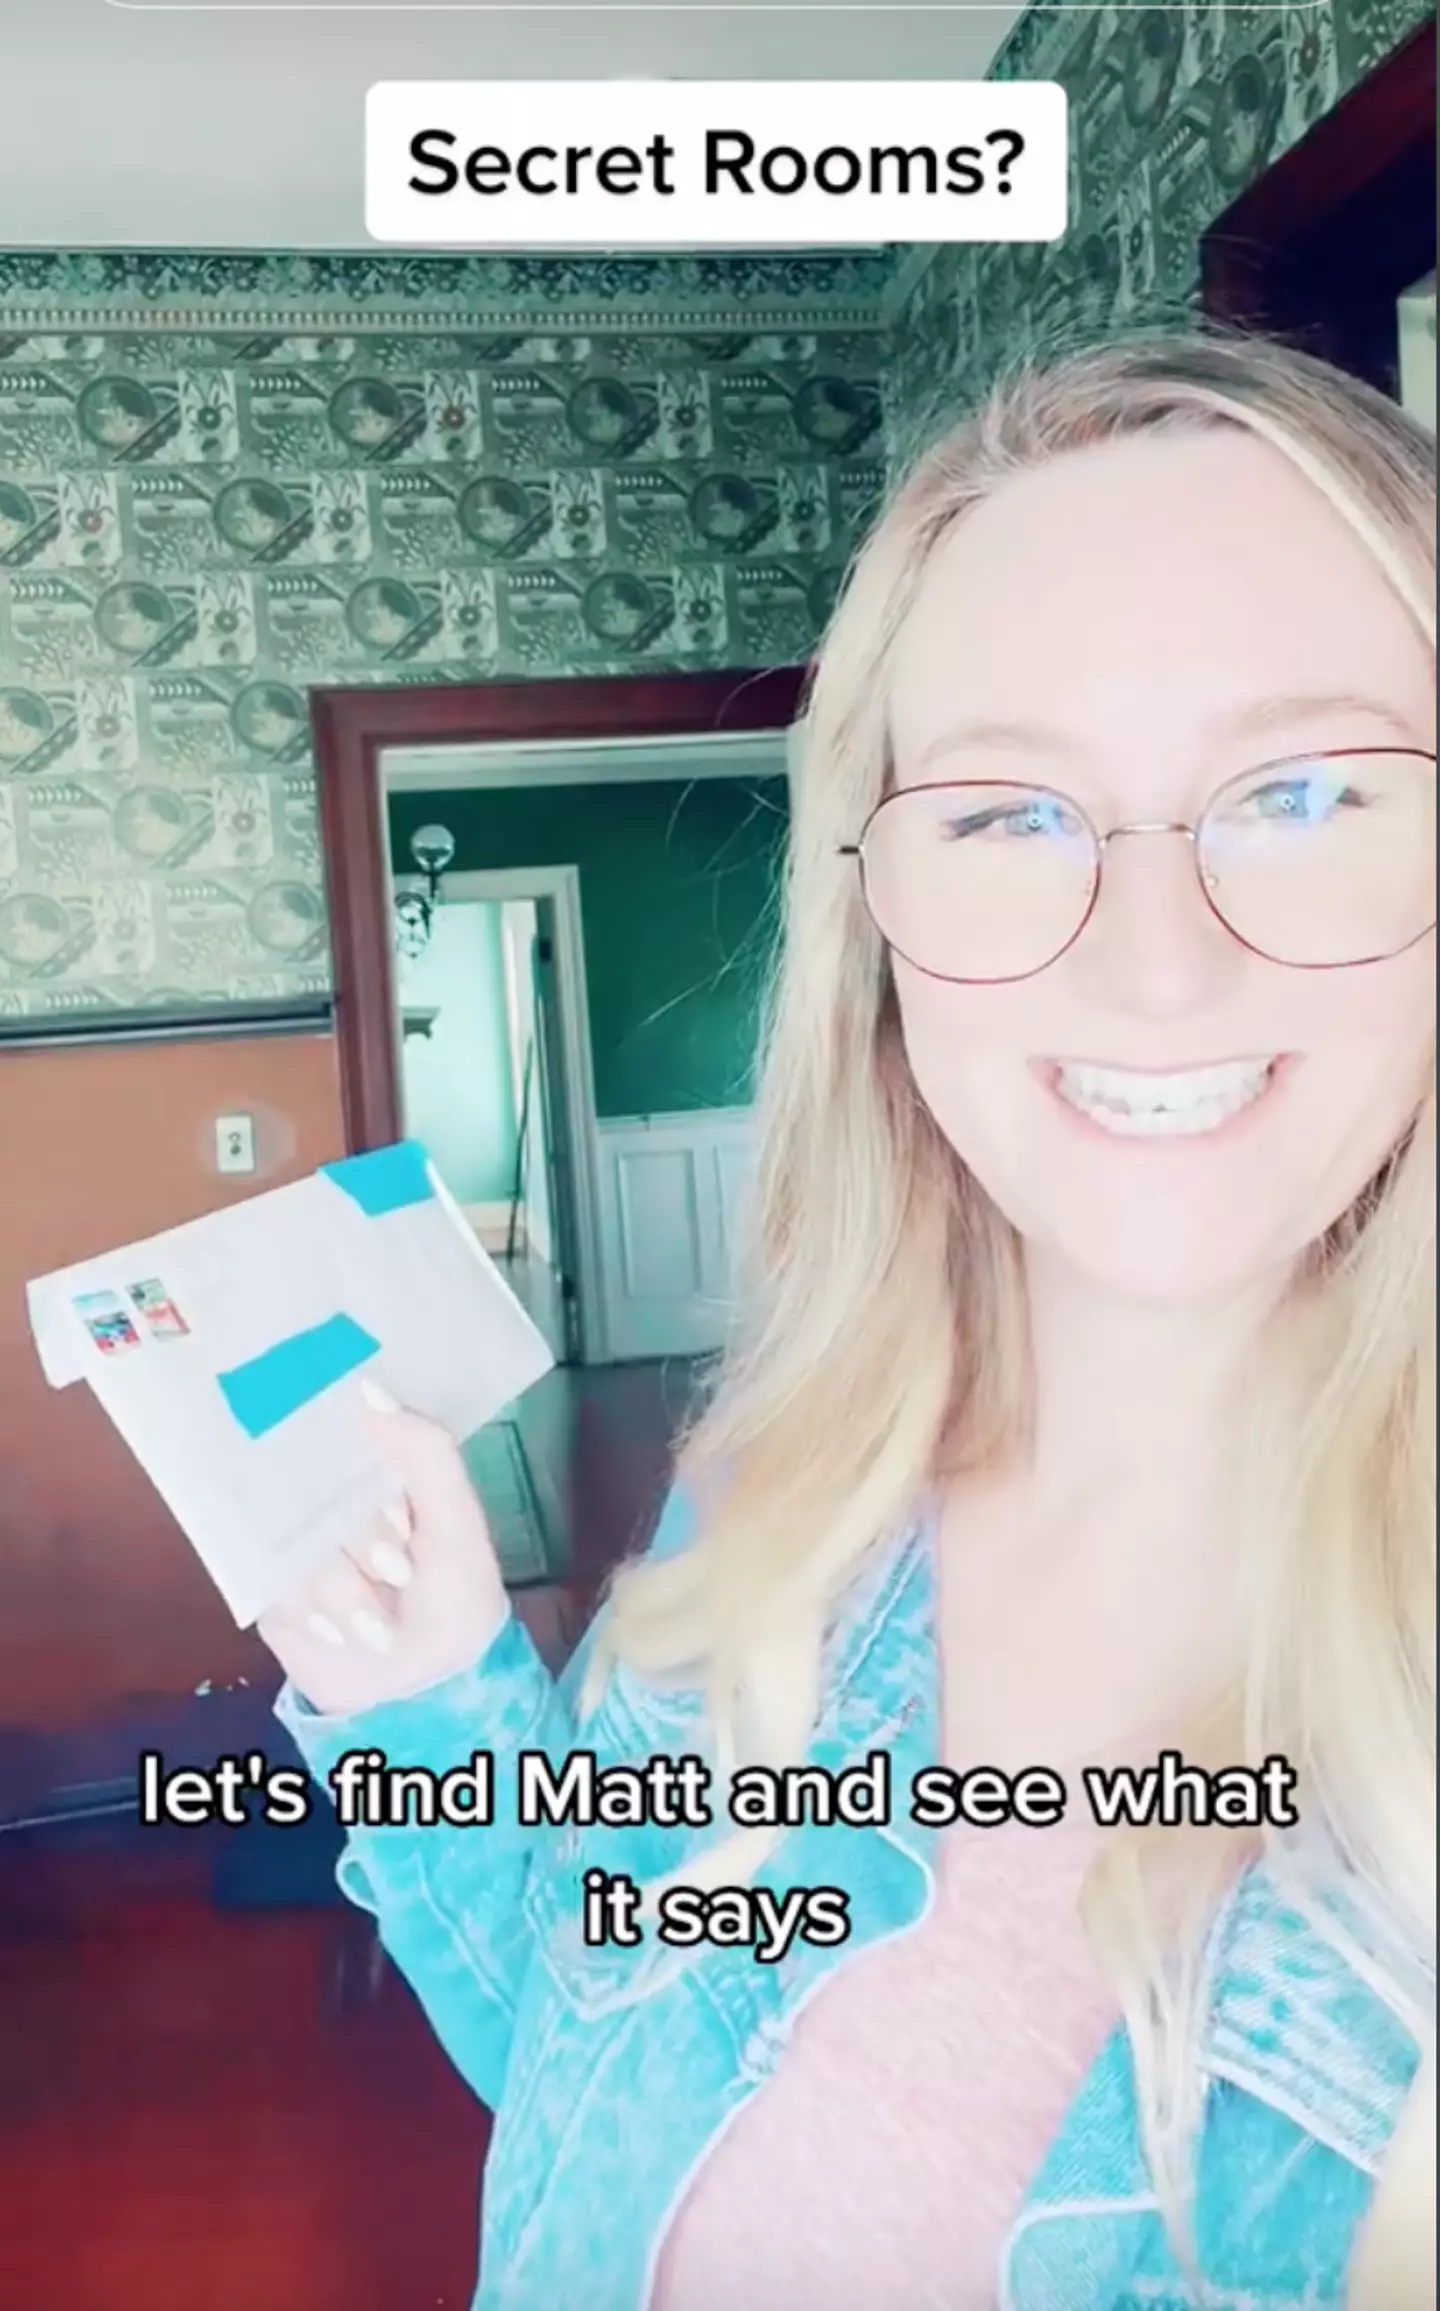 Courtney and Matt got a letter from a previous occupant of the house.